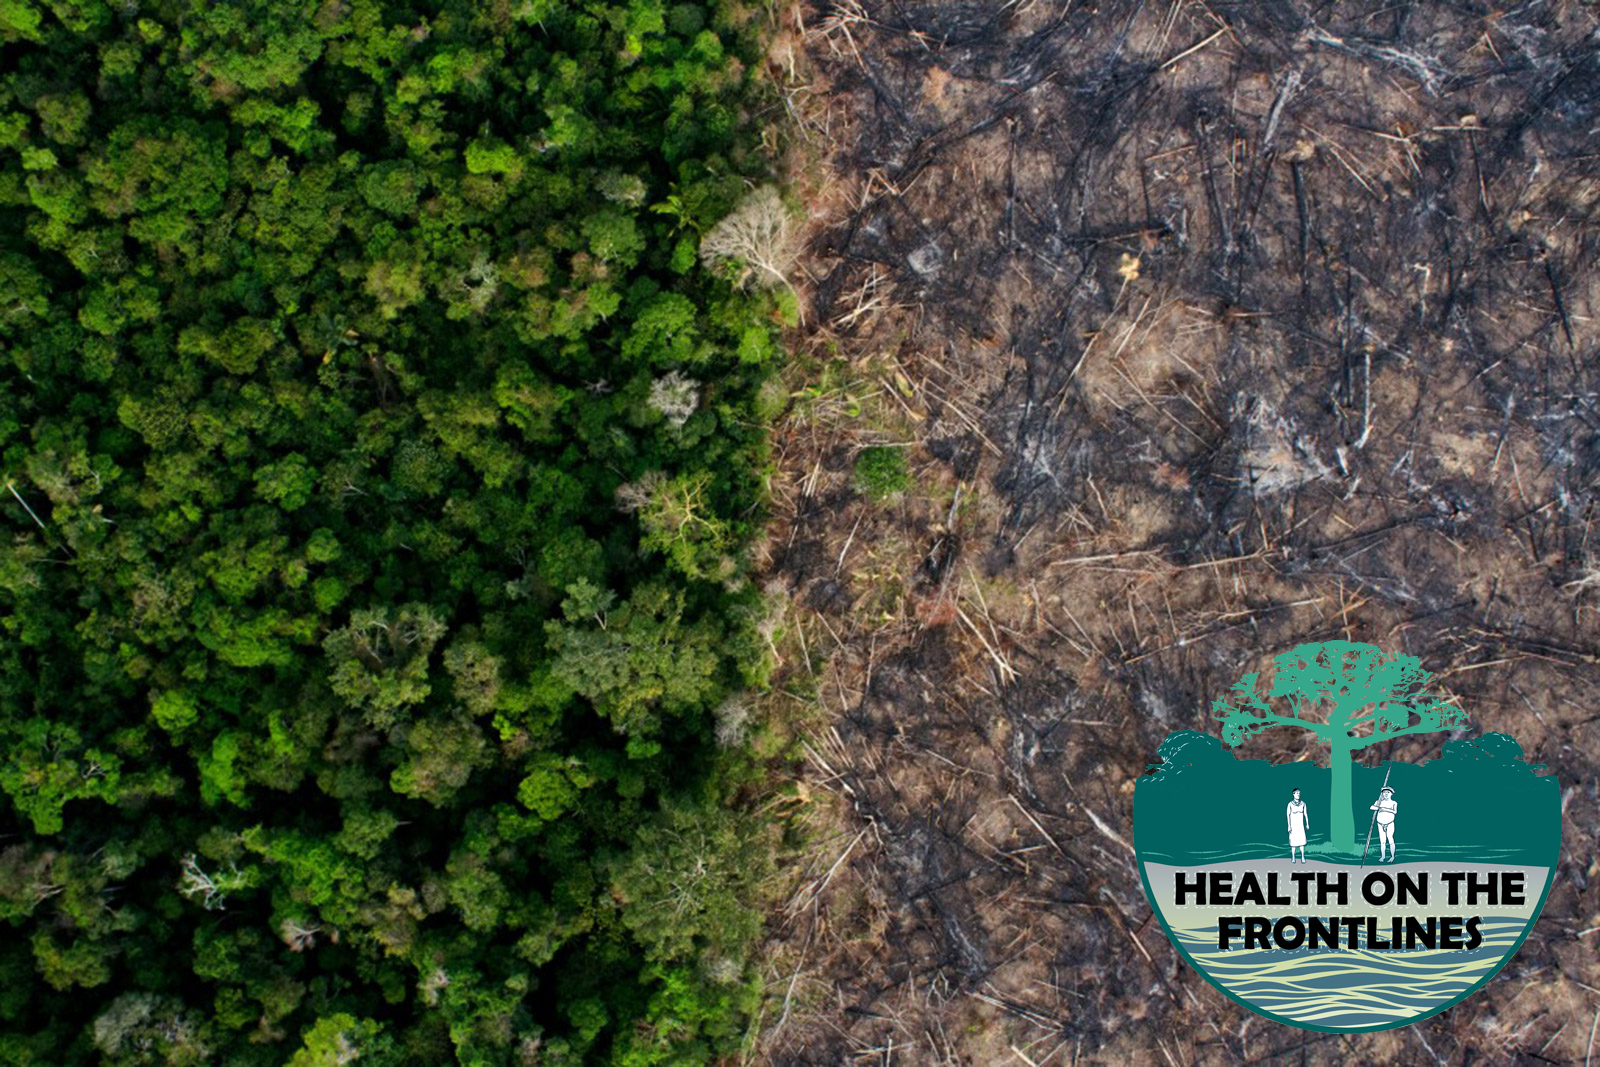 Three Critical Consequences Of The Amazon Fires: Biodiversity Loss, Climate  Change and Health - Amazon Frontlines